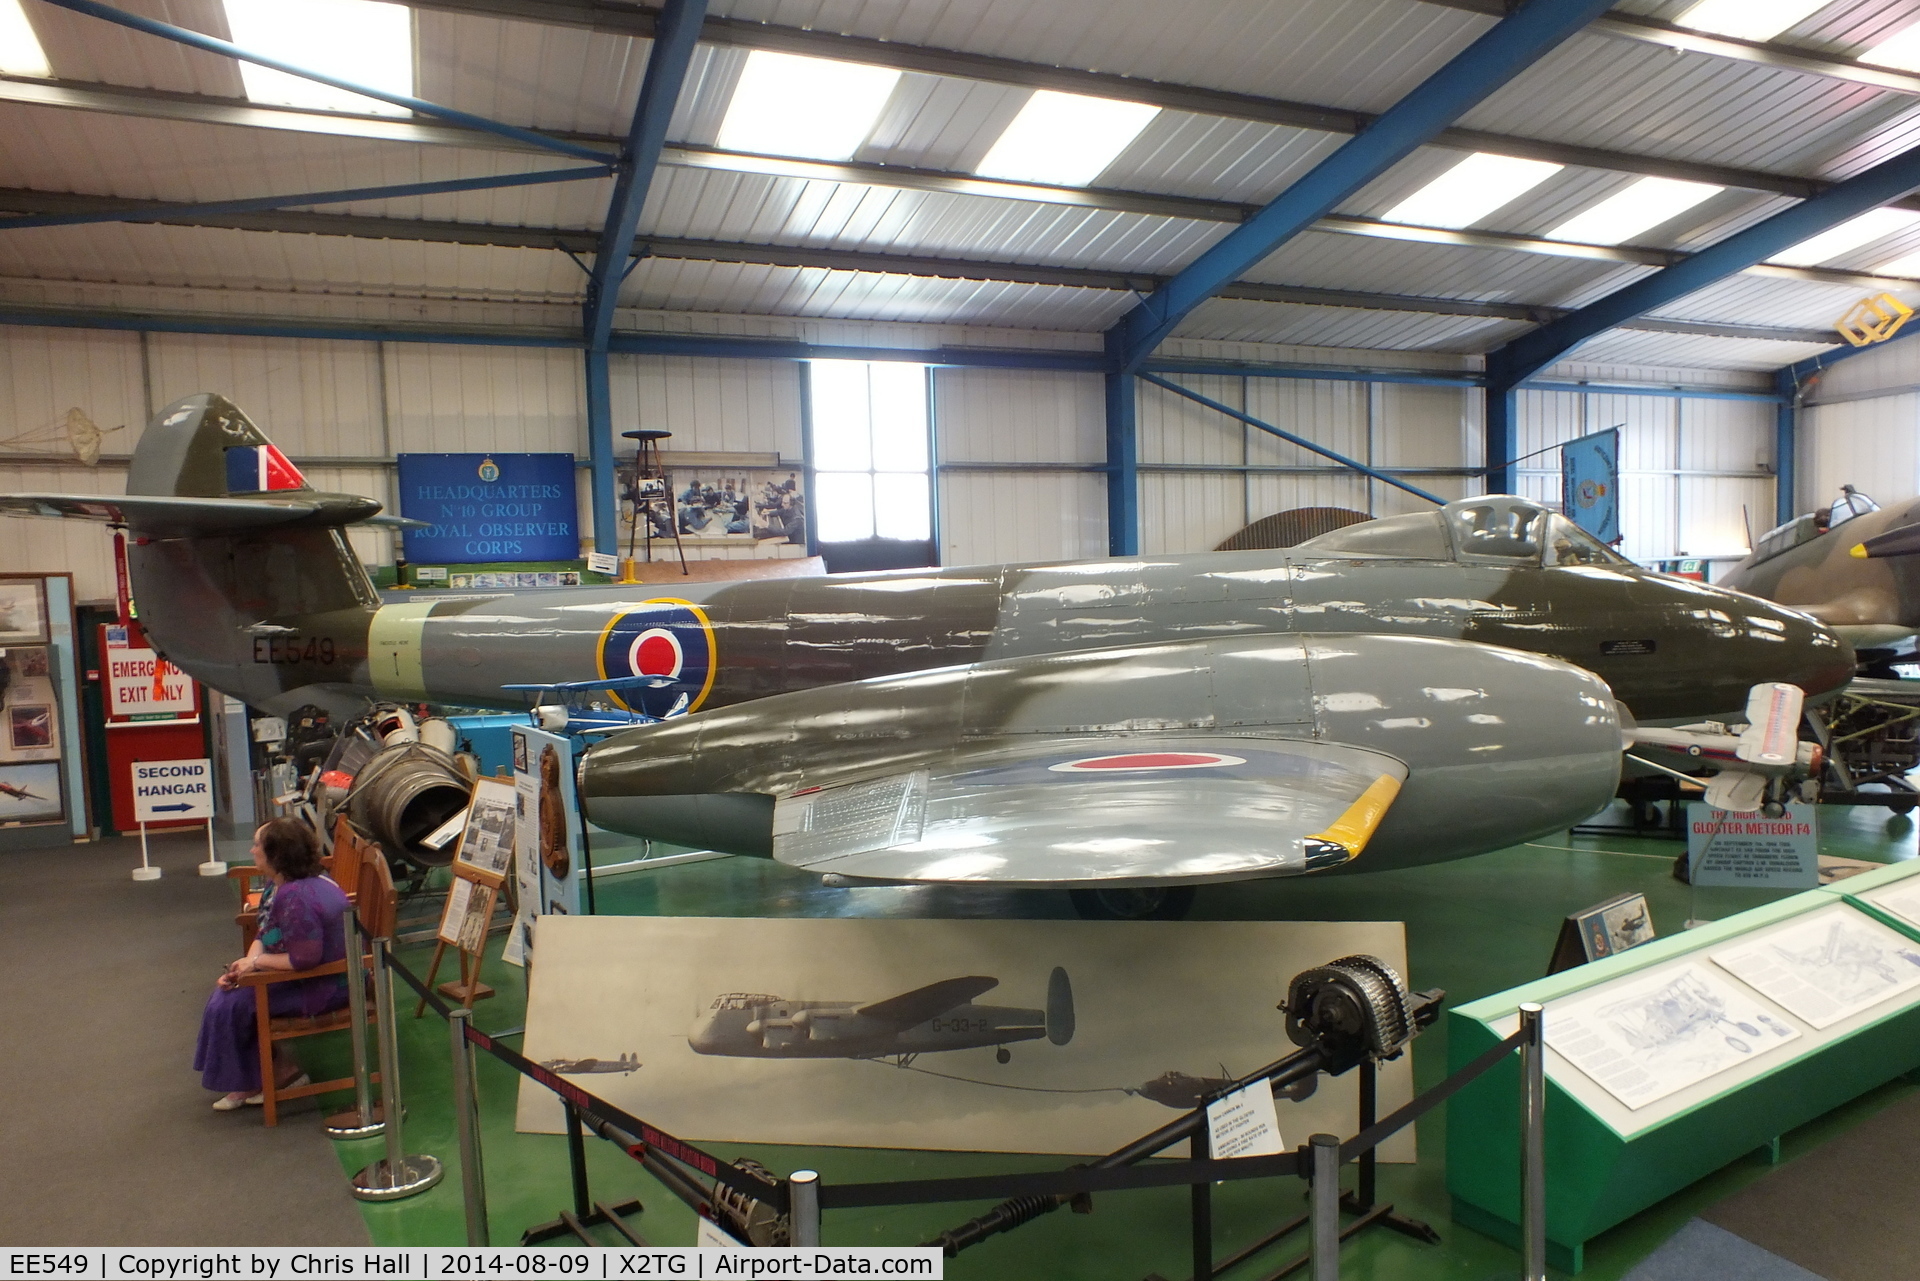 EE549, 1946 Gloster Meteor F.4 C/N Not found EE549, at the Tangmere Military Aviation Museum